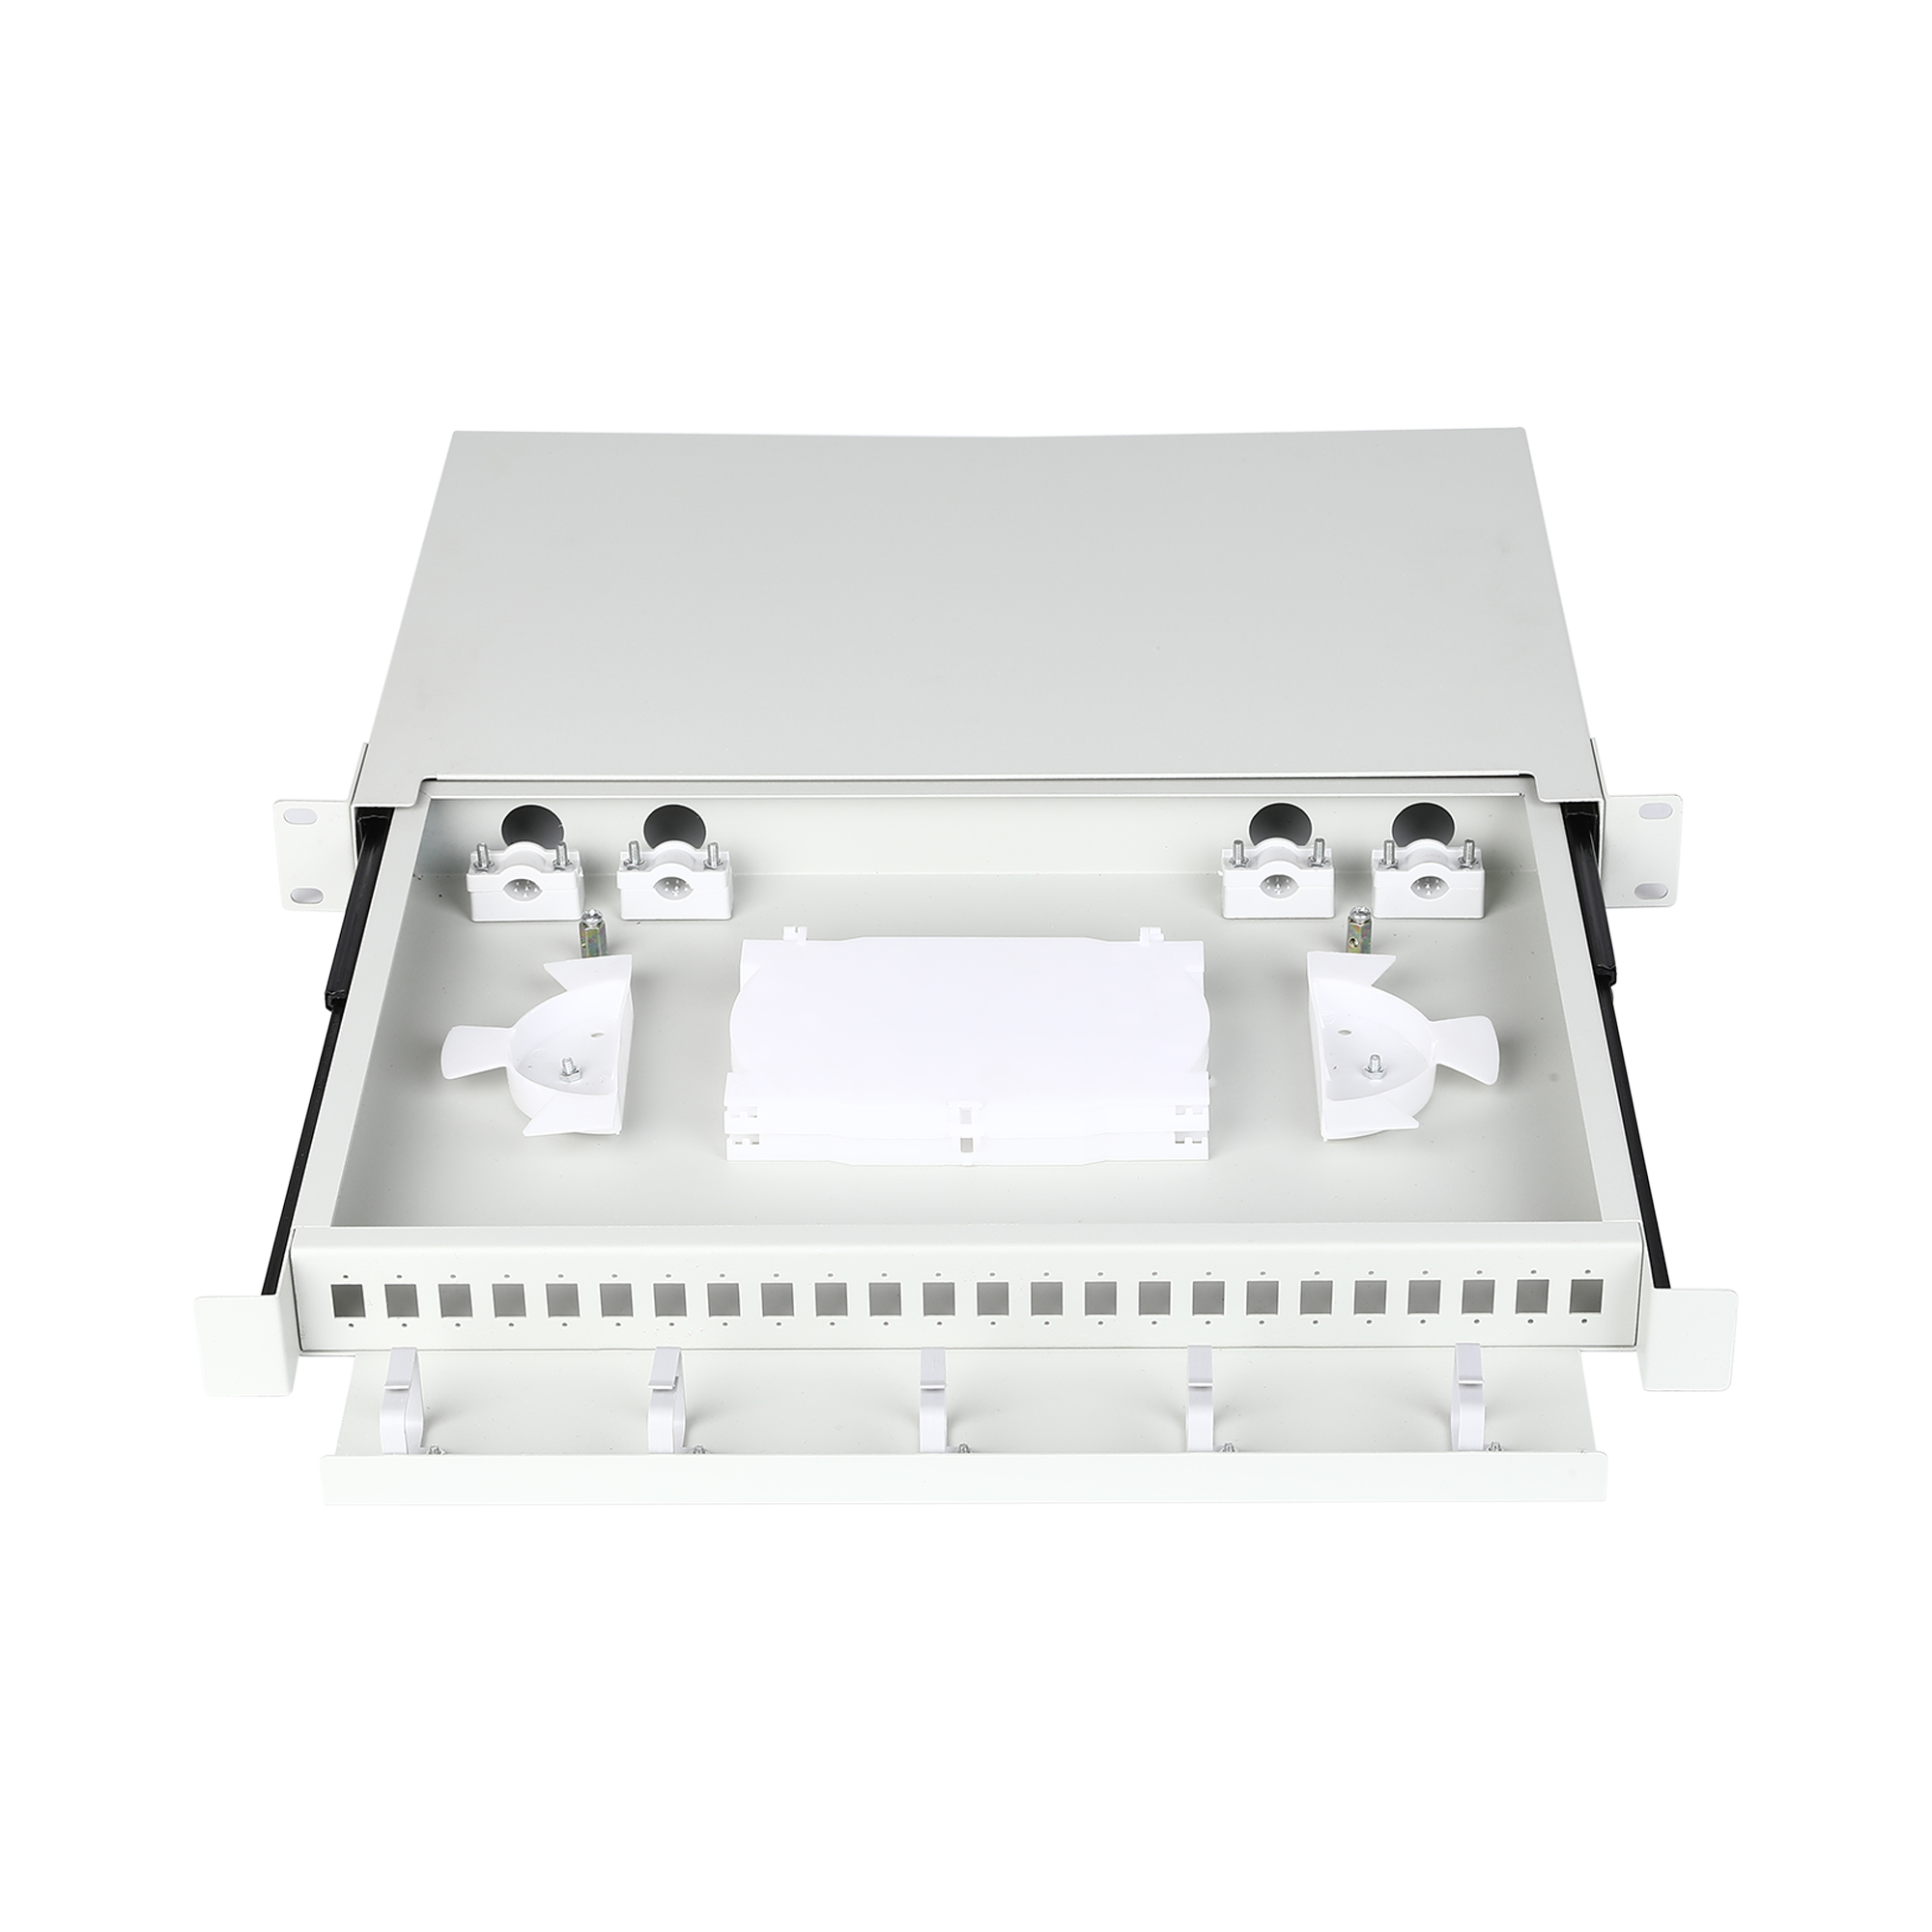 1U 19inch 24 Ports Fiber patch panel with Front Ring Type Cable manager, Grey color